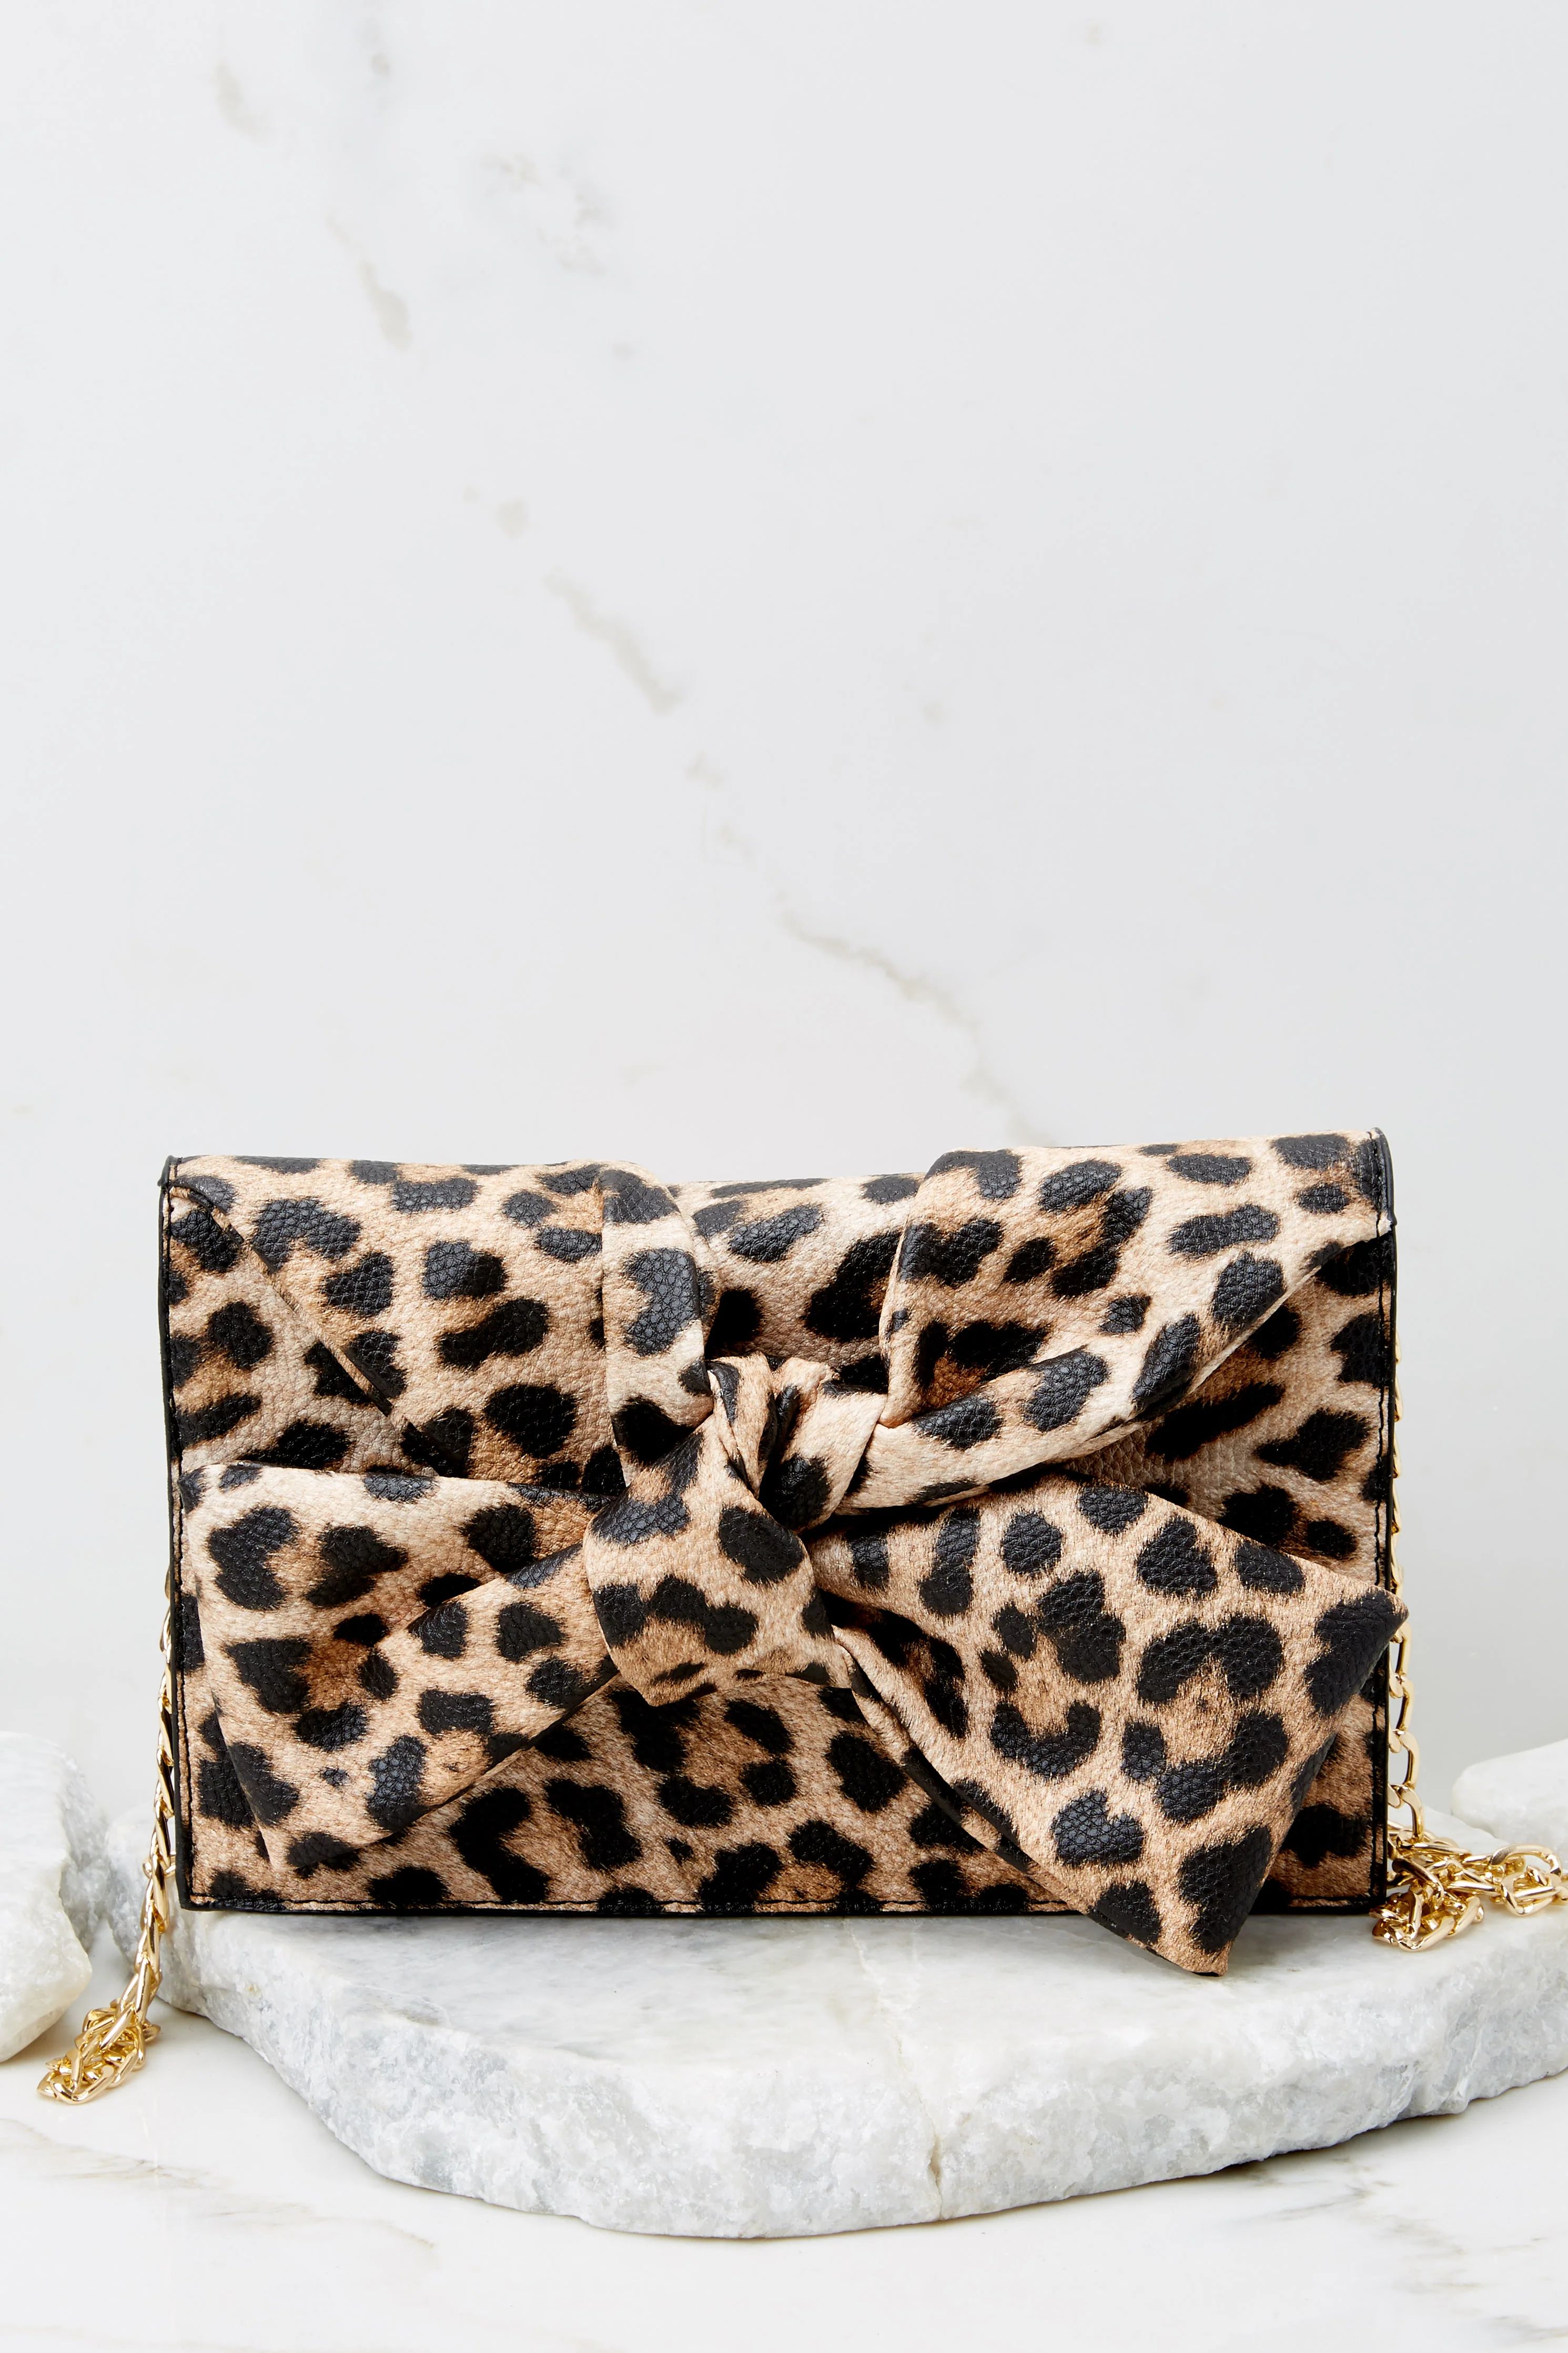 Double Check Leopard Print Clutch | Red Dress 